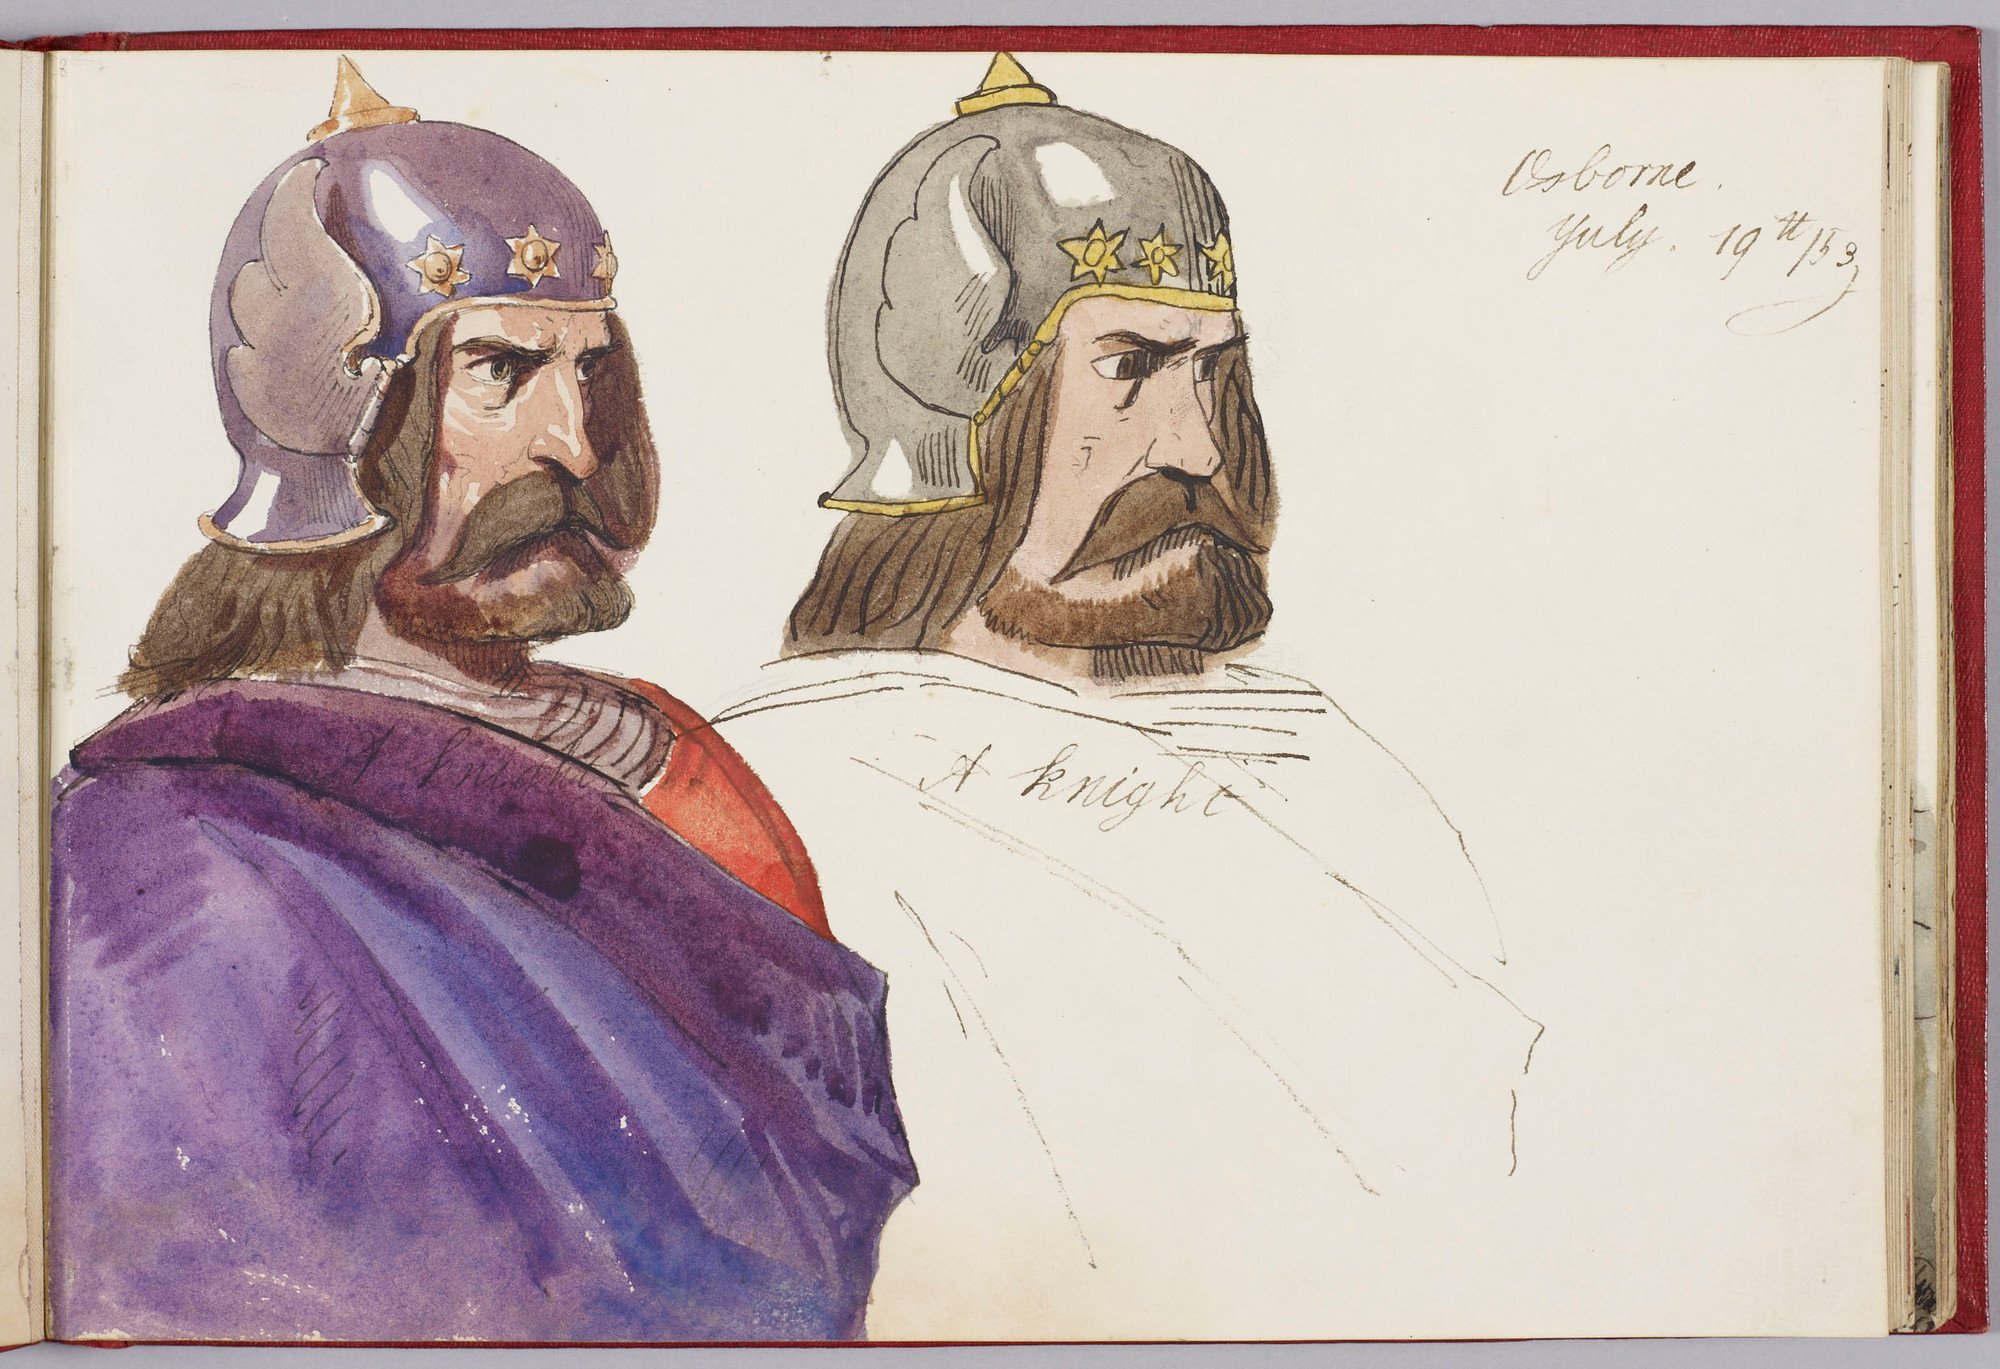 Sketch and painting of a knight from Albert Edward's teaching sketch book